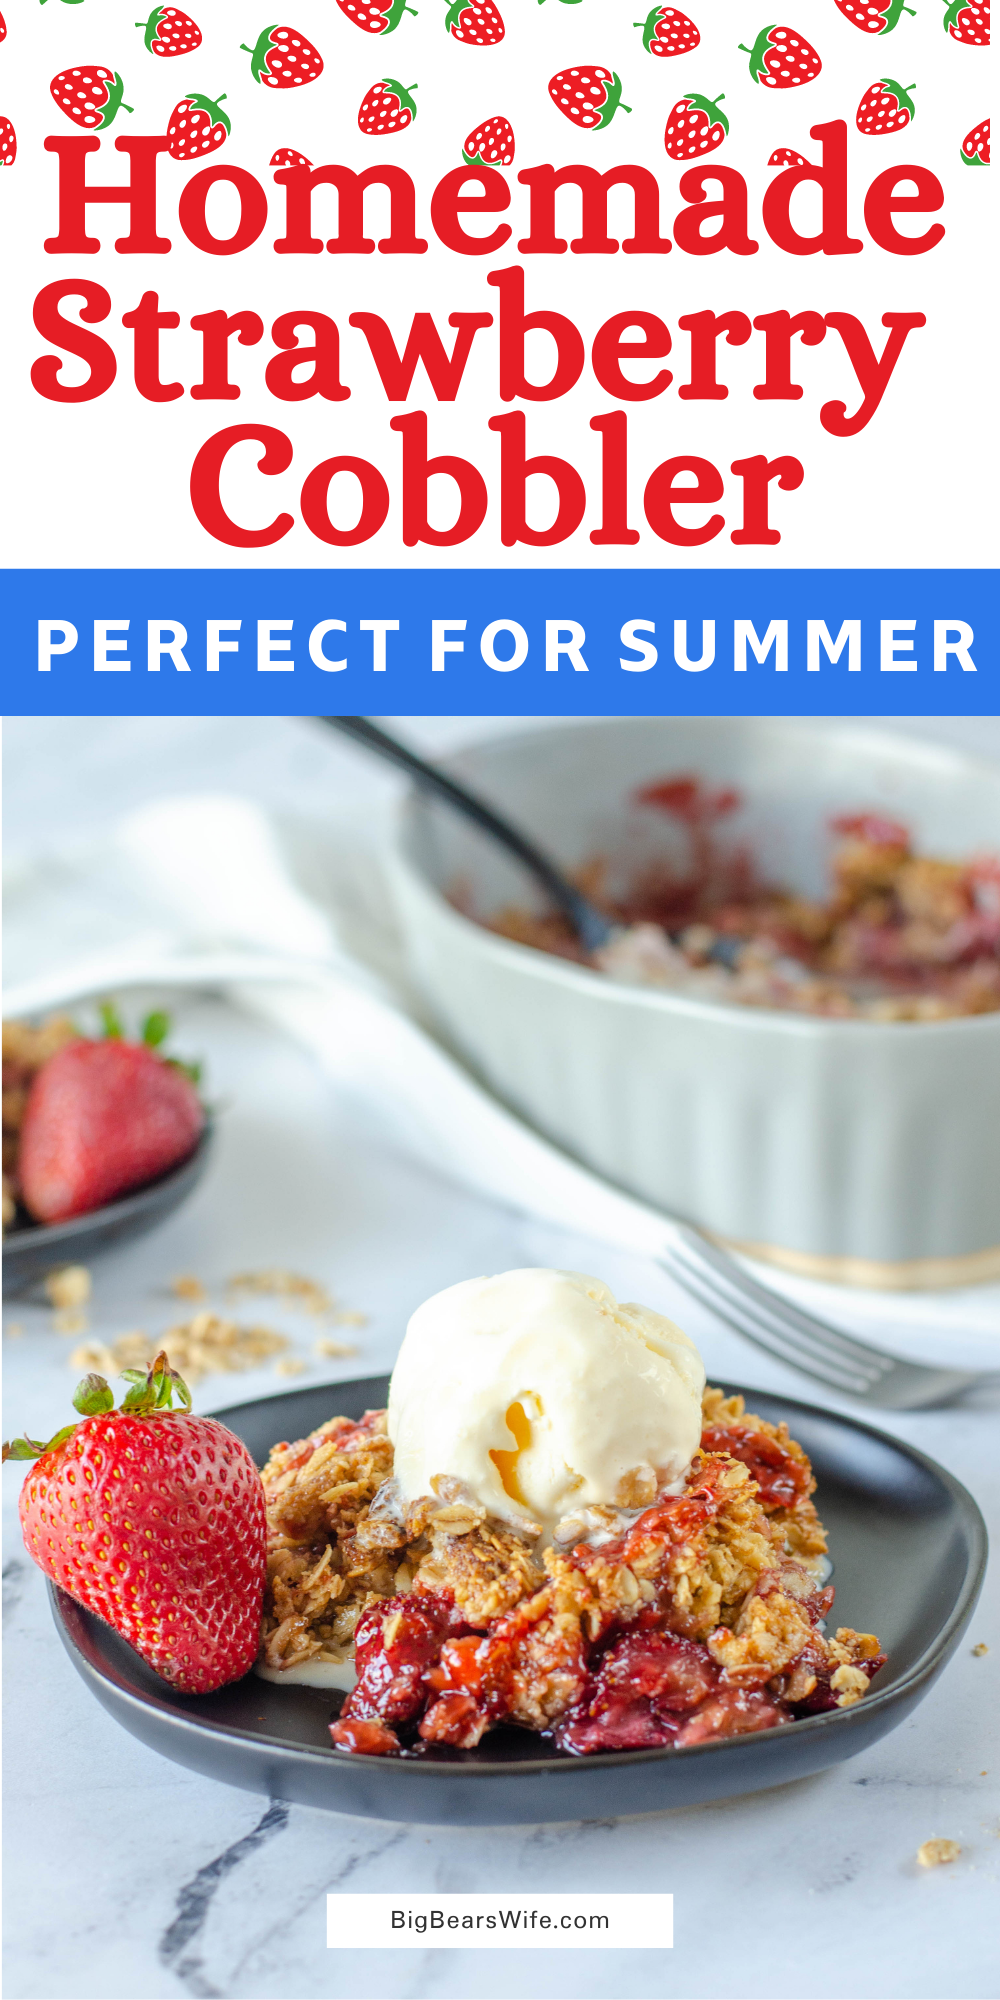 Call this Homemade Strawberry Cobbler, Strawberry Crumble or a Strawberry crisp but also call it delicious! Sweet Summer Strawberries are baked into a sweet bubbly dessert with a sweet topping. via @bigbearswife